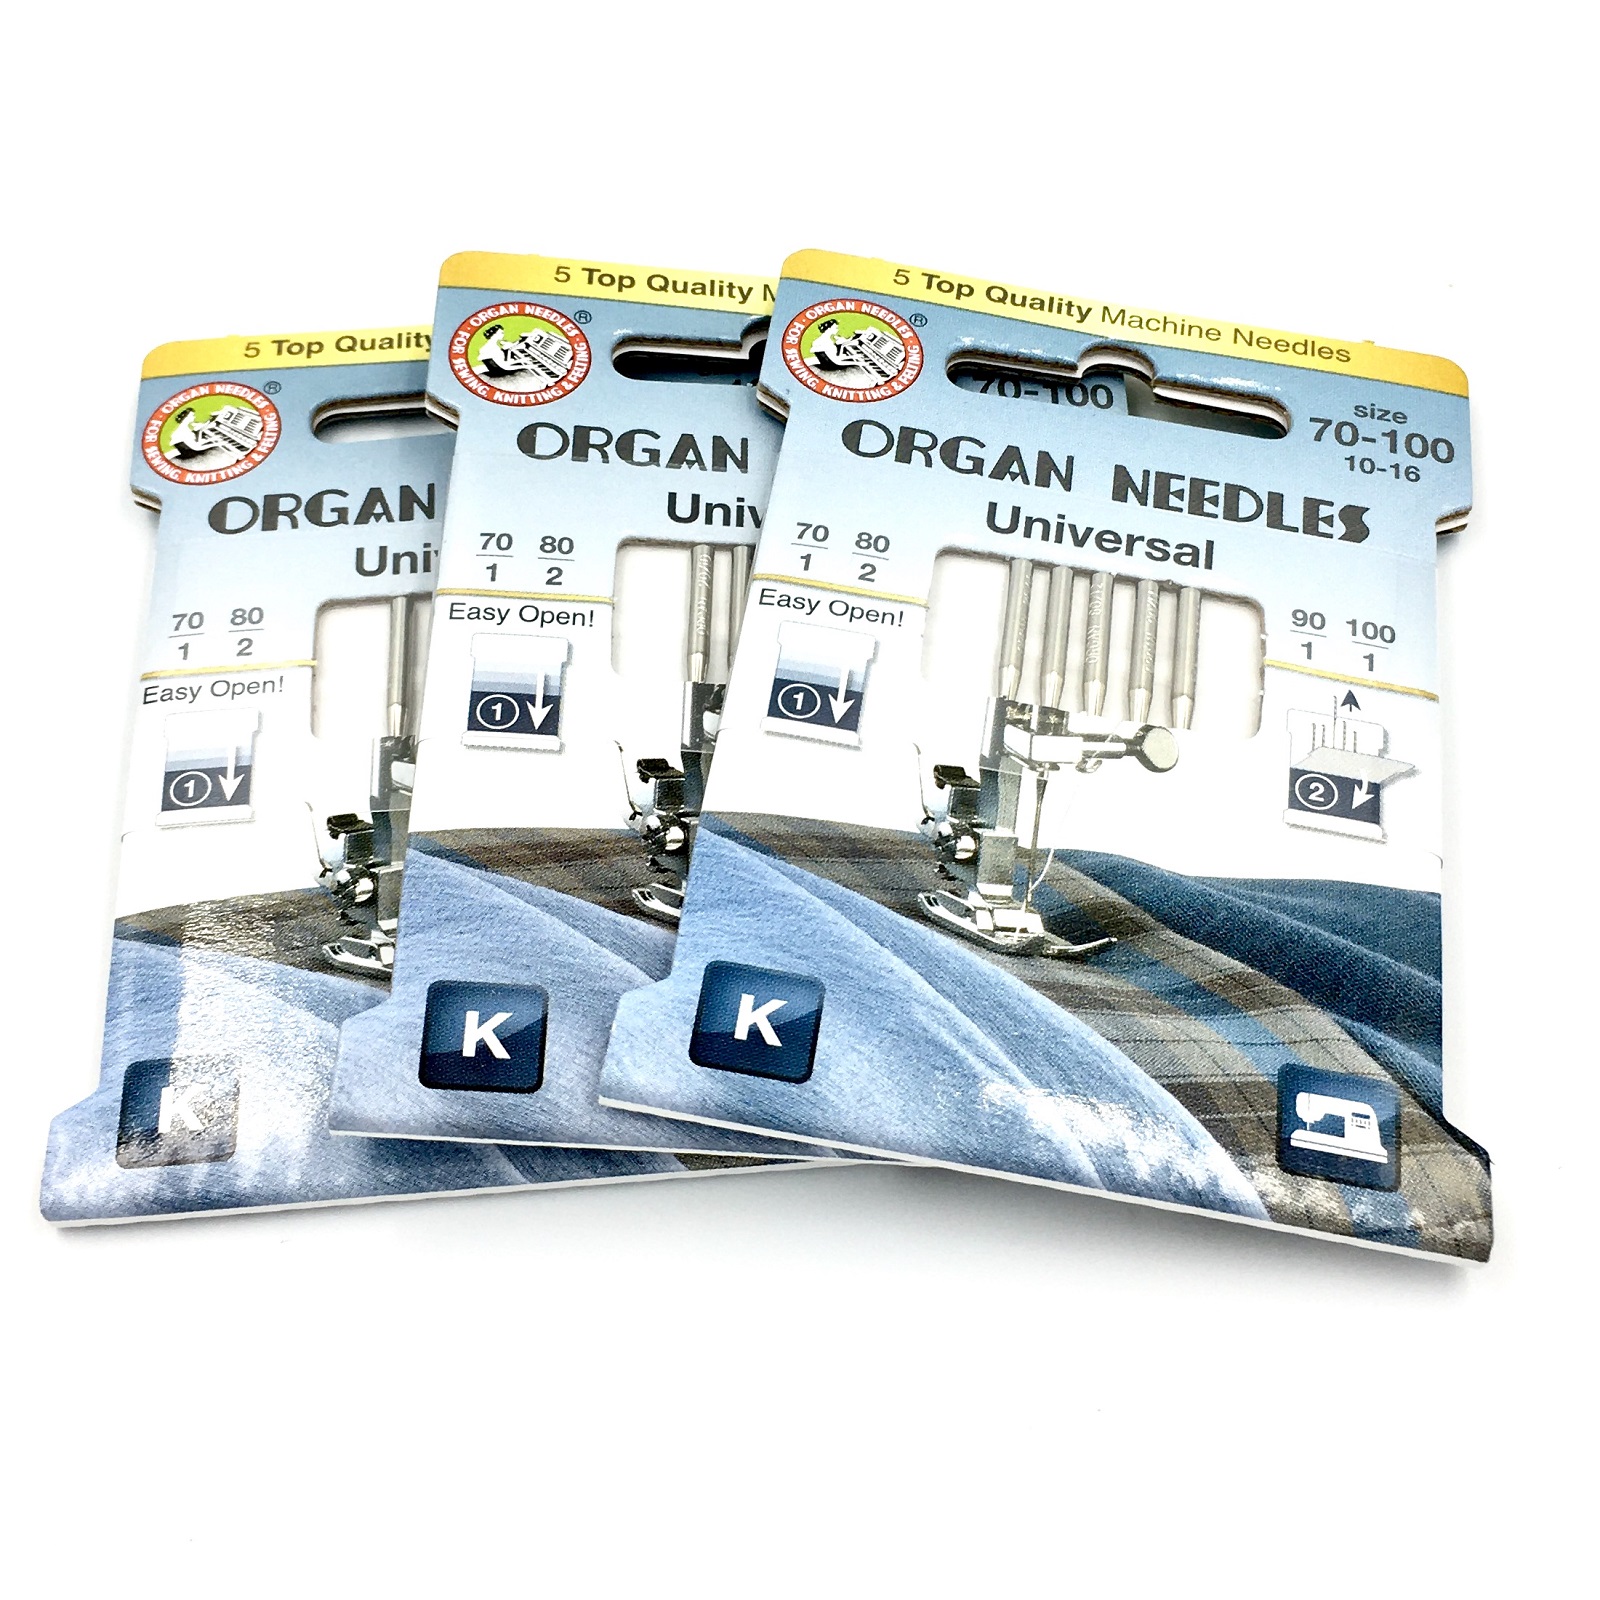 Organ ECO Domestic Needles 130/705H (3 x 5 pack - assorted)